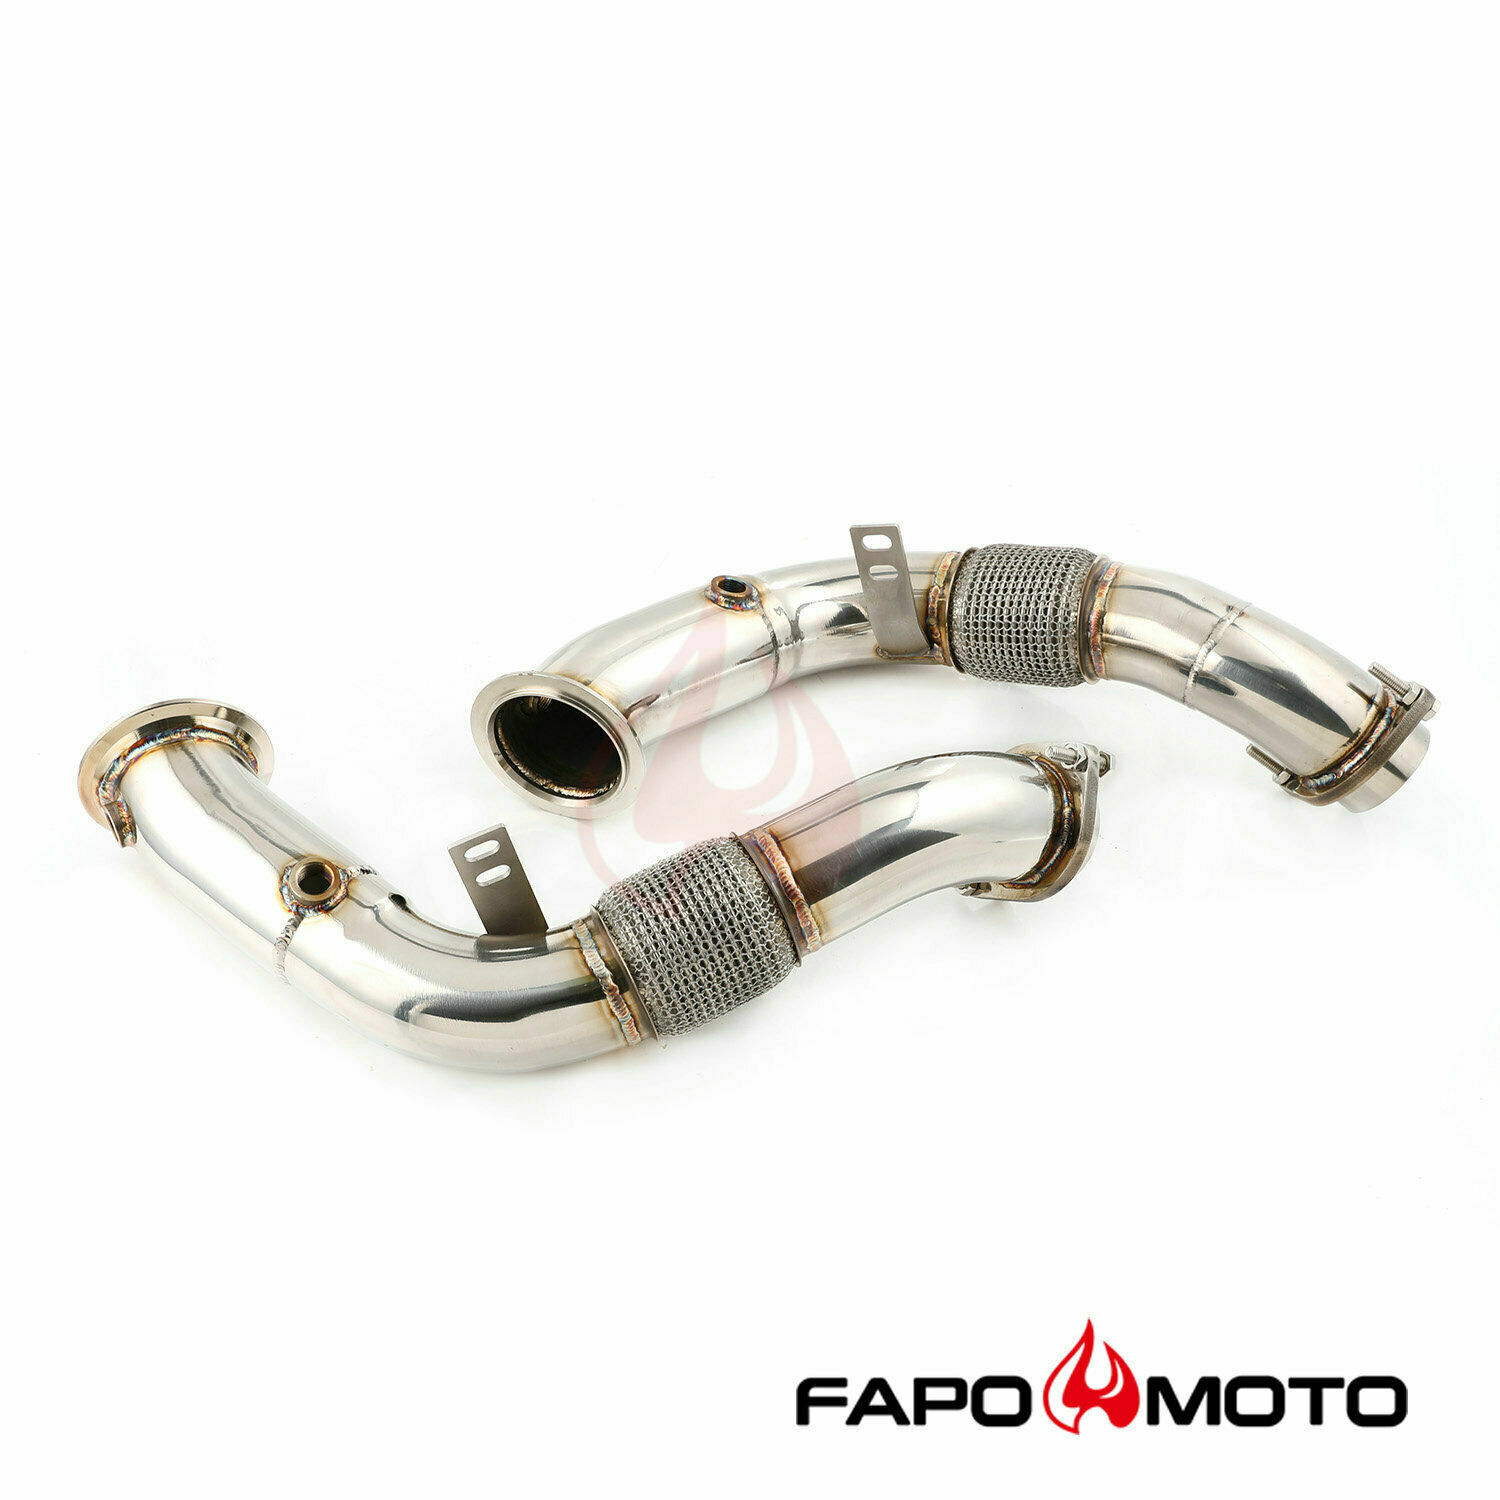 FAPO TURBO EXHAUST DOWNPIPE FOR 08-14 BMW 650i X6/X5/5/6/7-SERIES N63B44 Catless